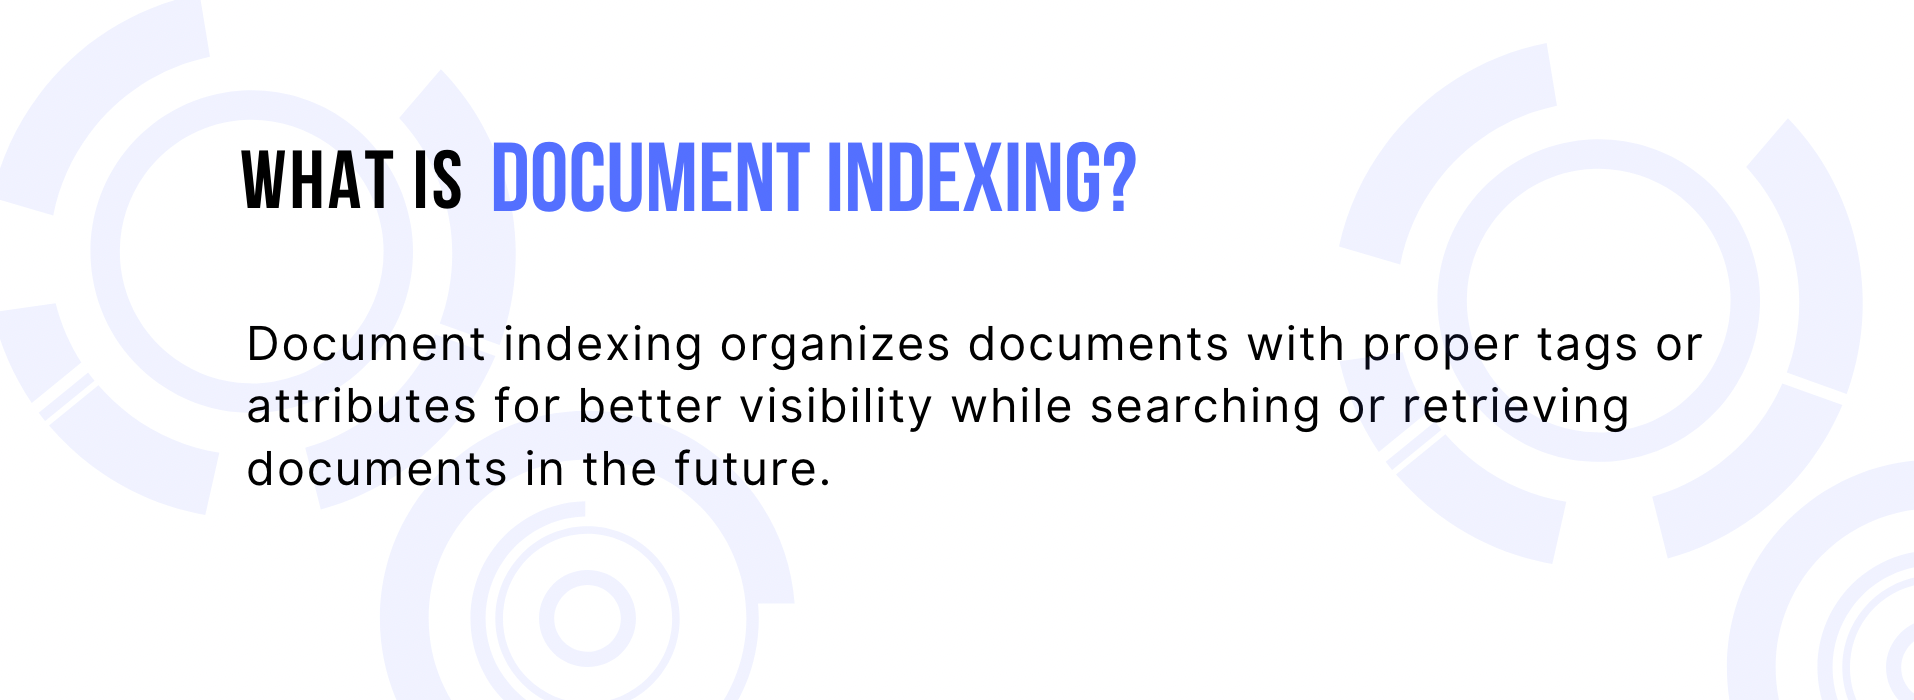 Document indexing definition